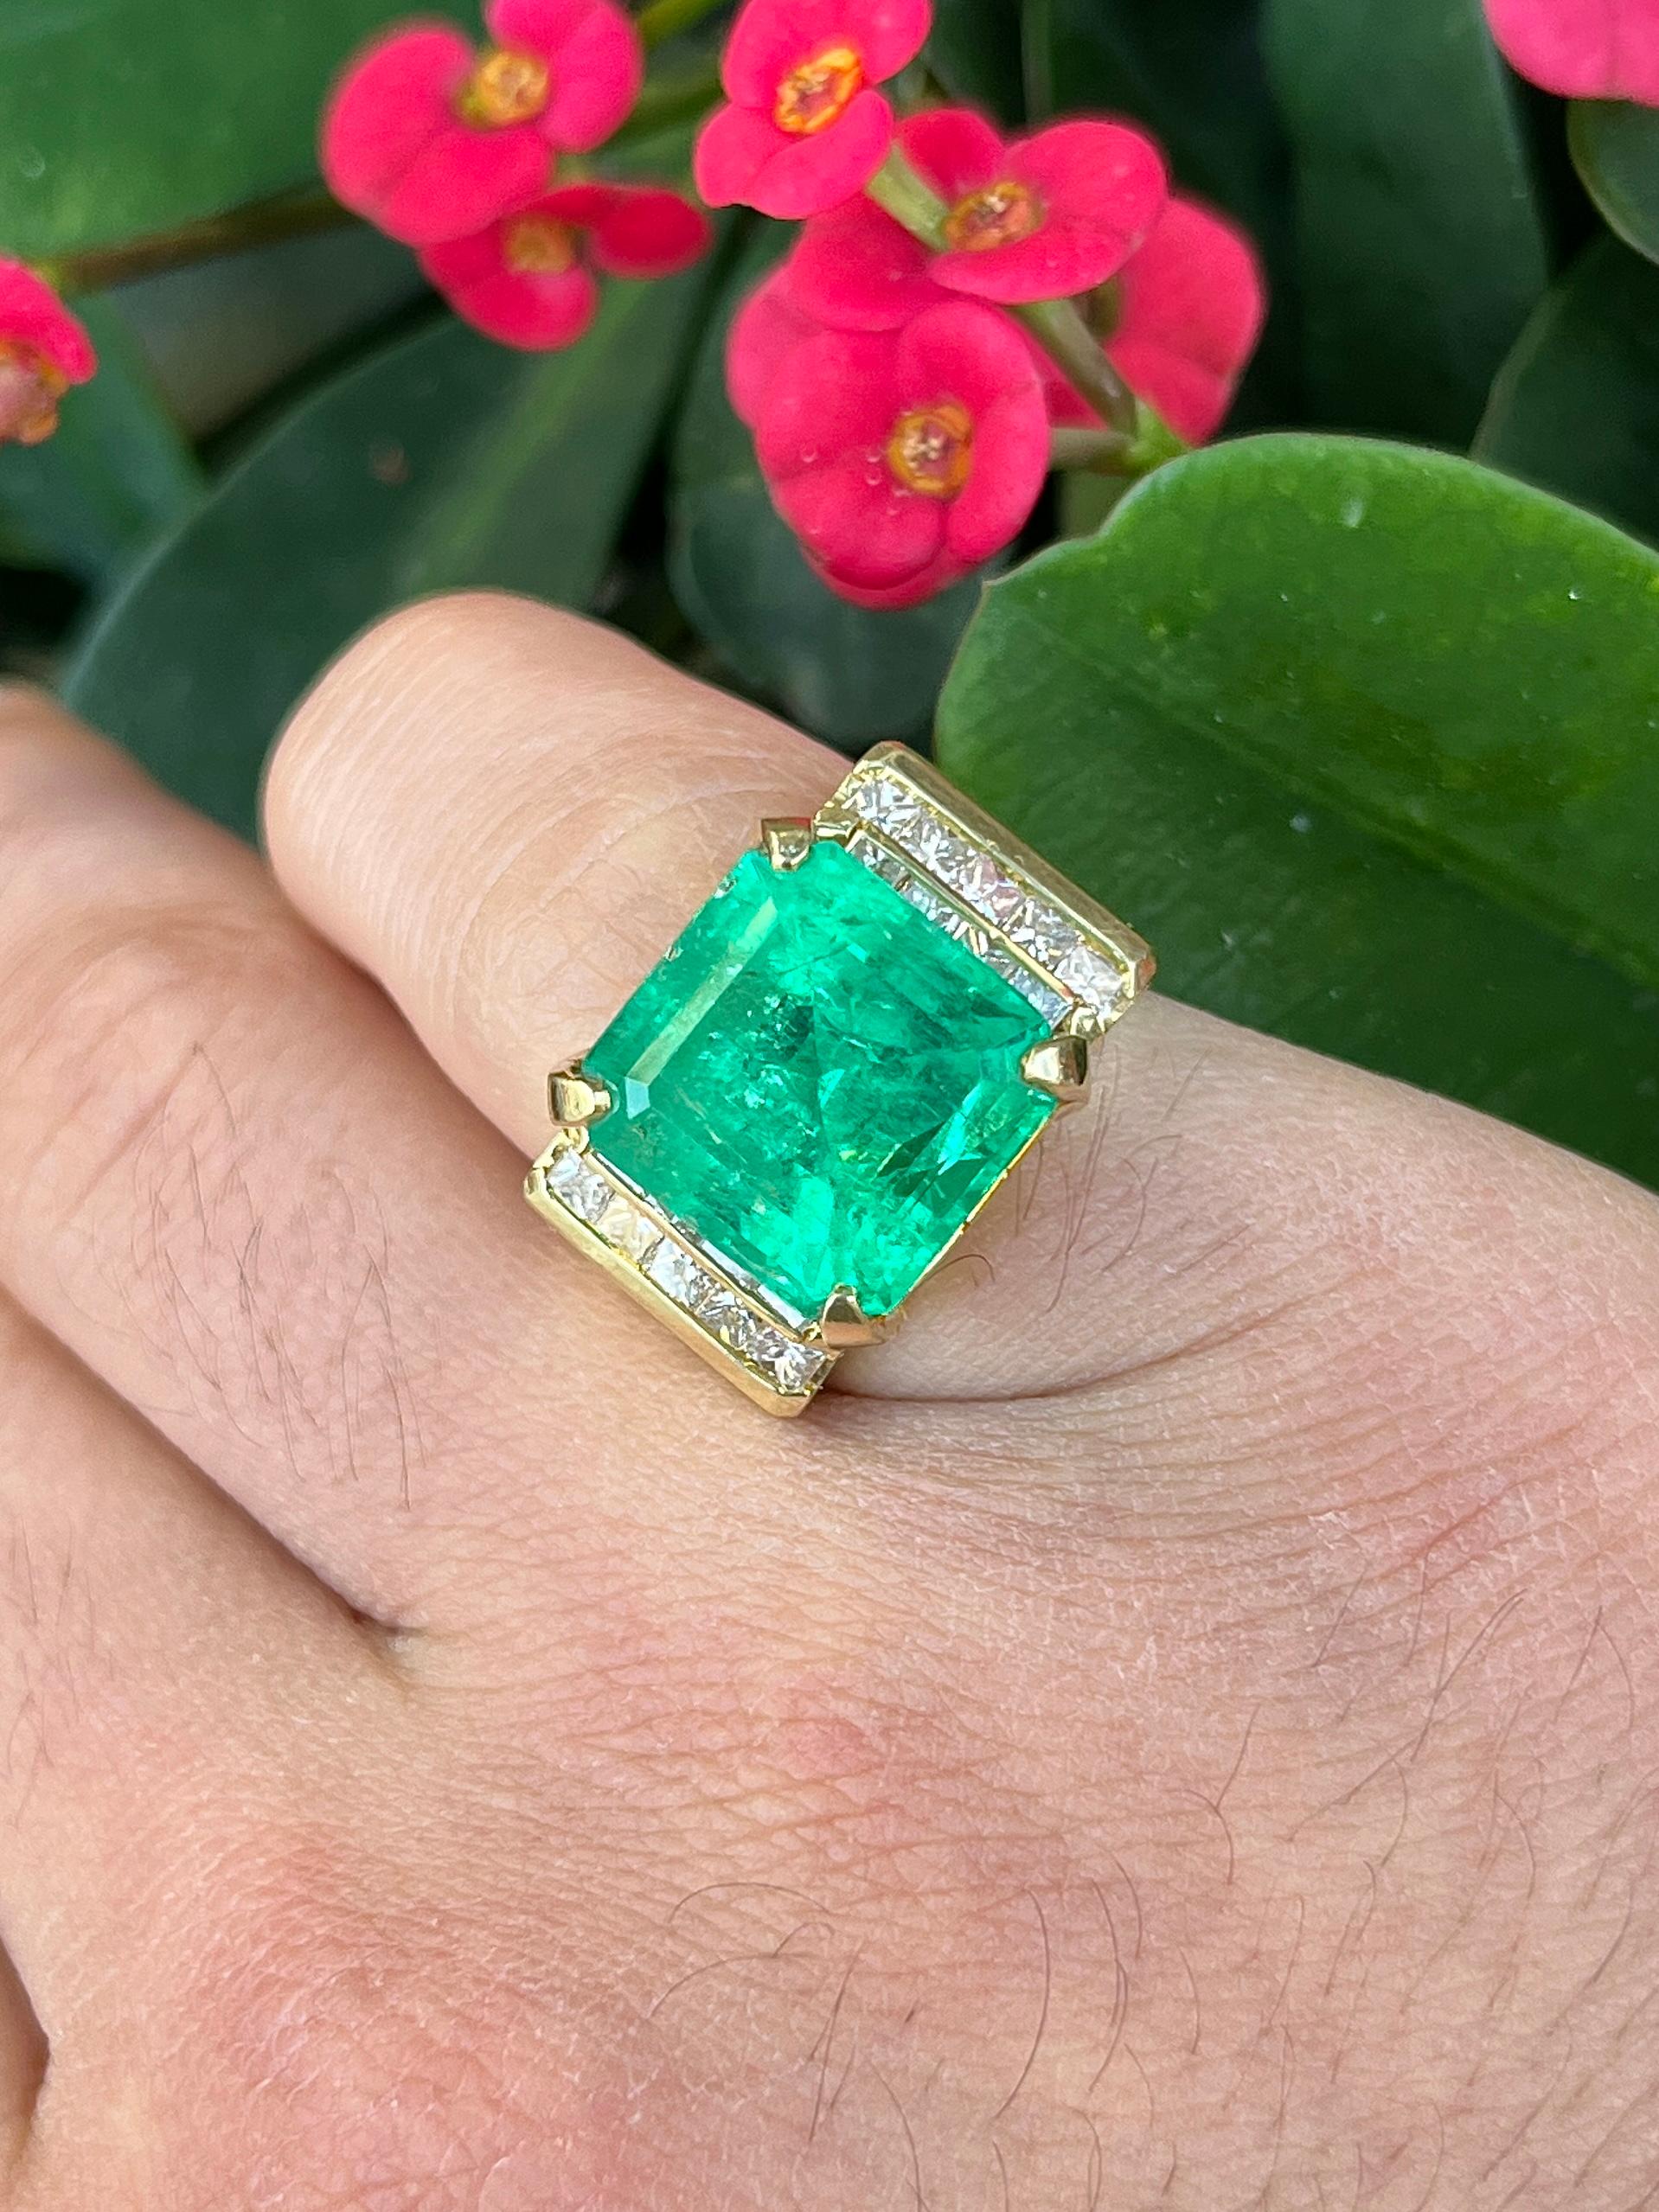 GIA Certified 13 Carat Colombian Emerald & Princess Diamond Unisex Ring in 18k In Excellent Condition For Sale In Miami, FL